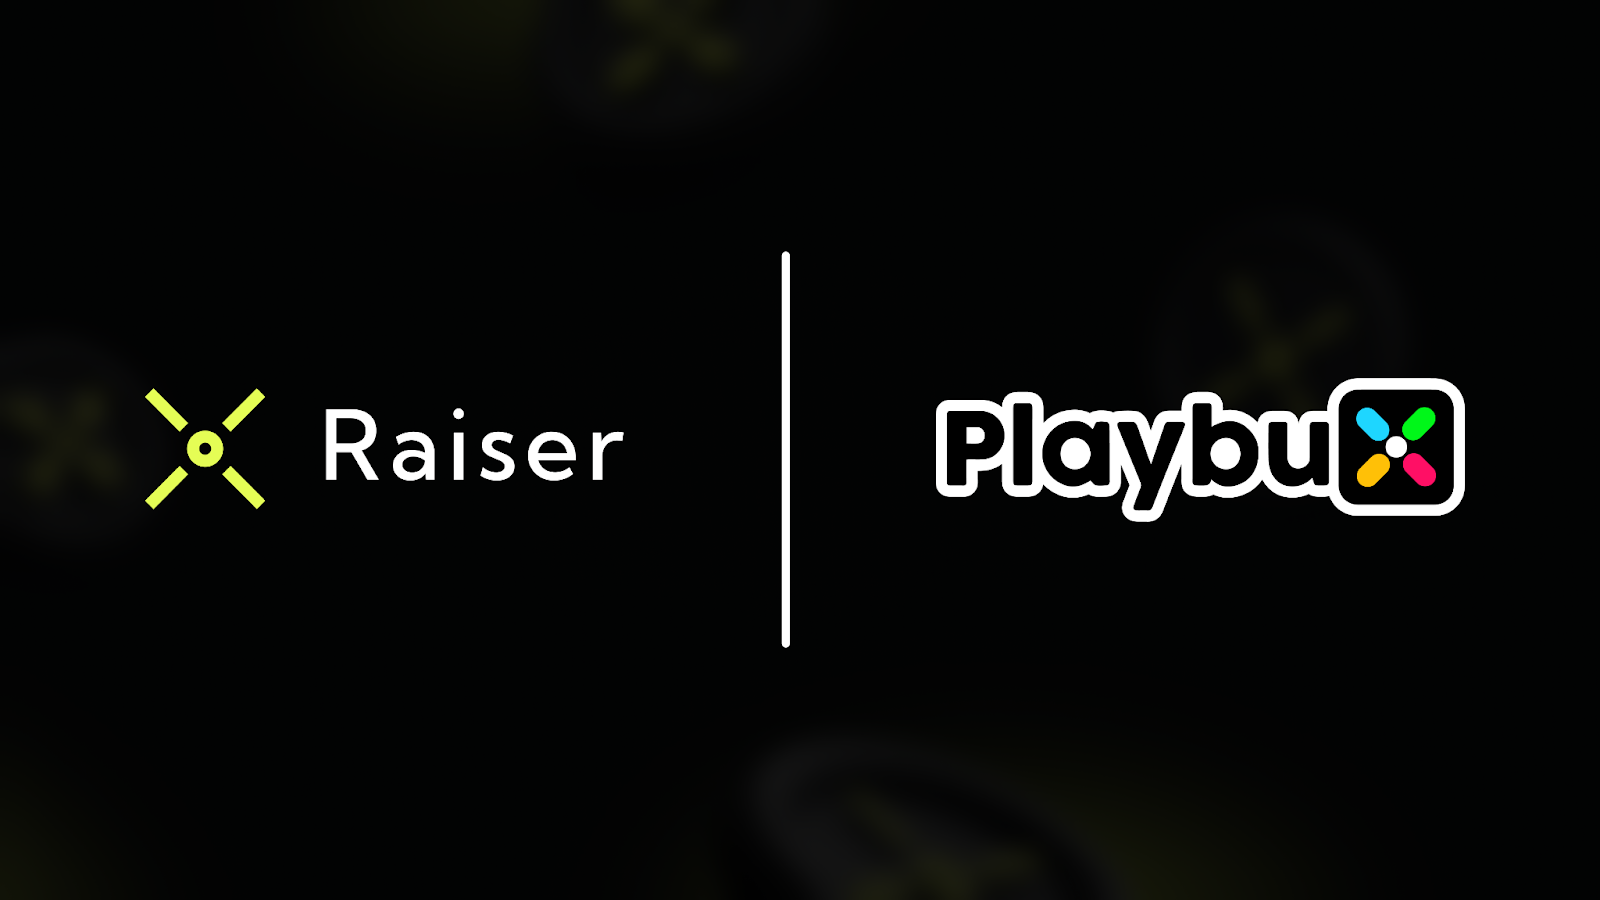 Raiser Launches Fair Community Offering (FCO) for Playbux